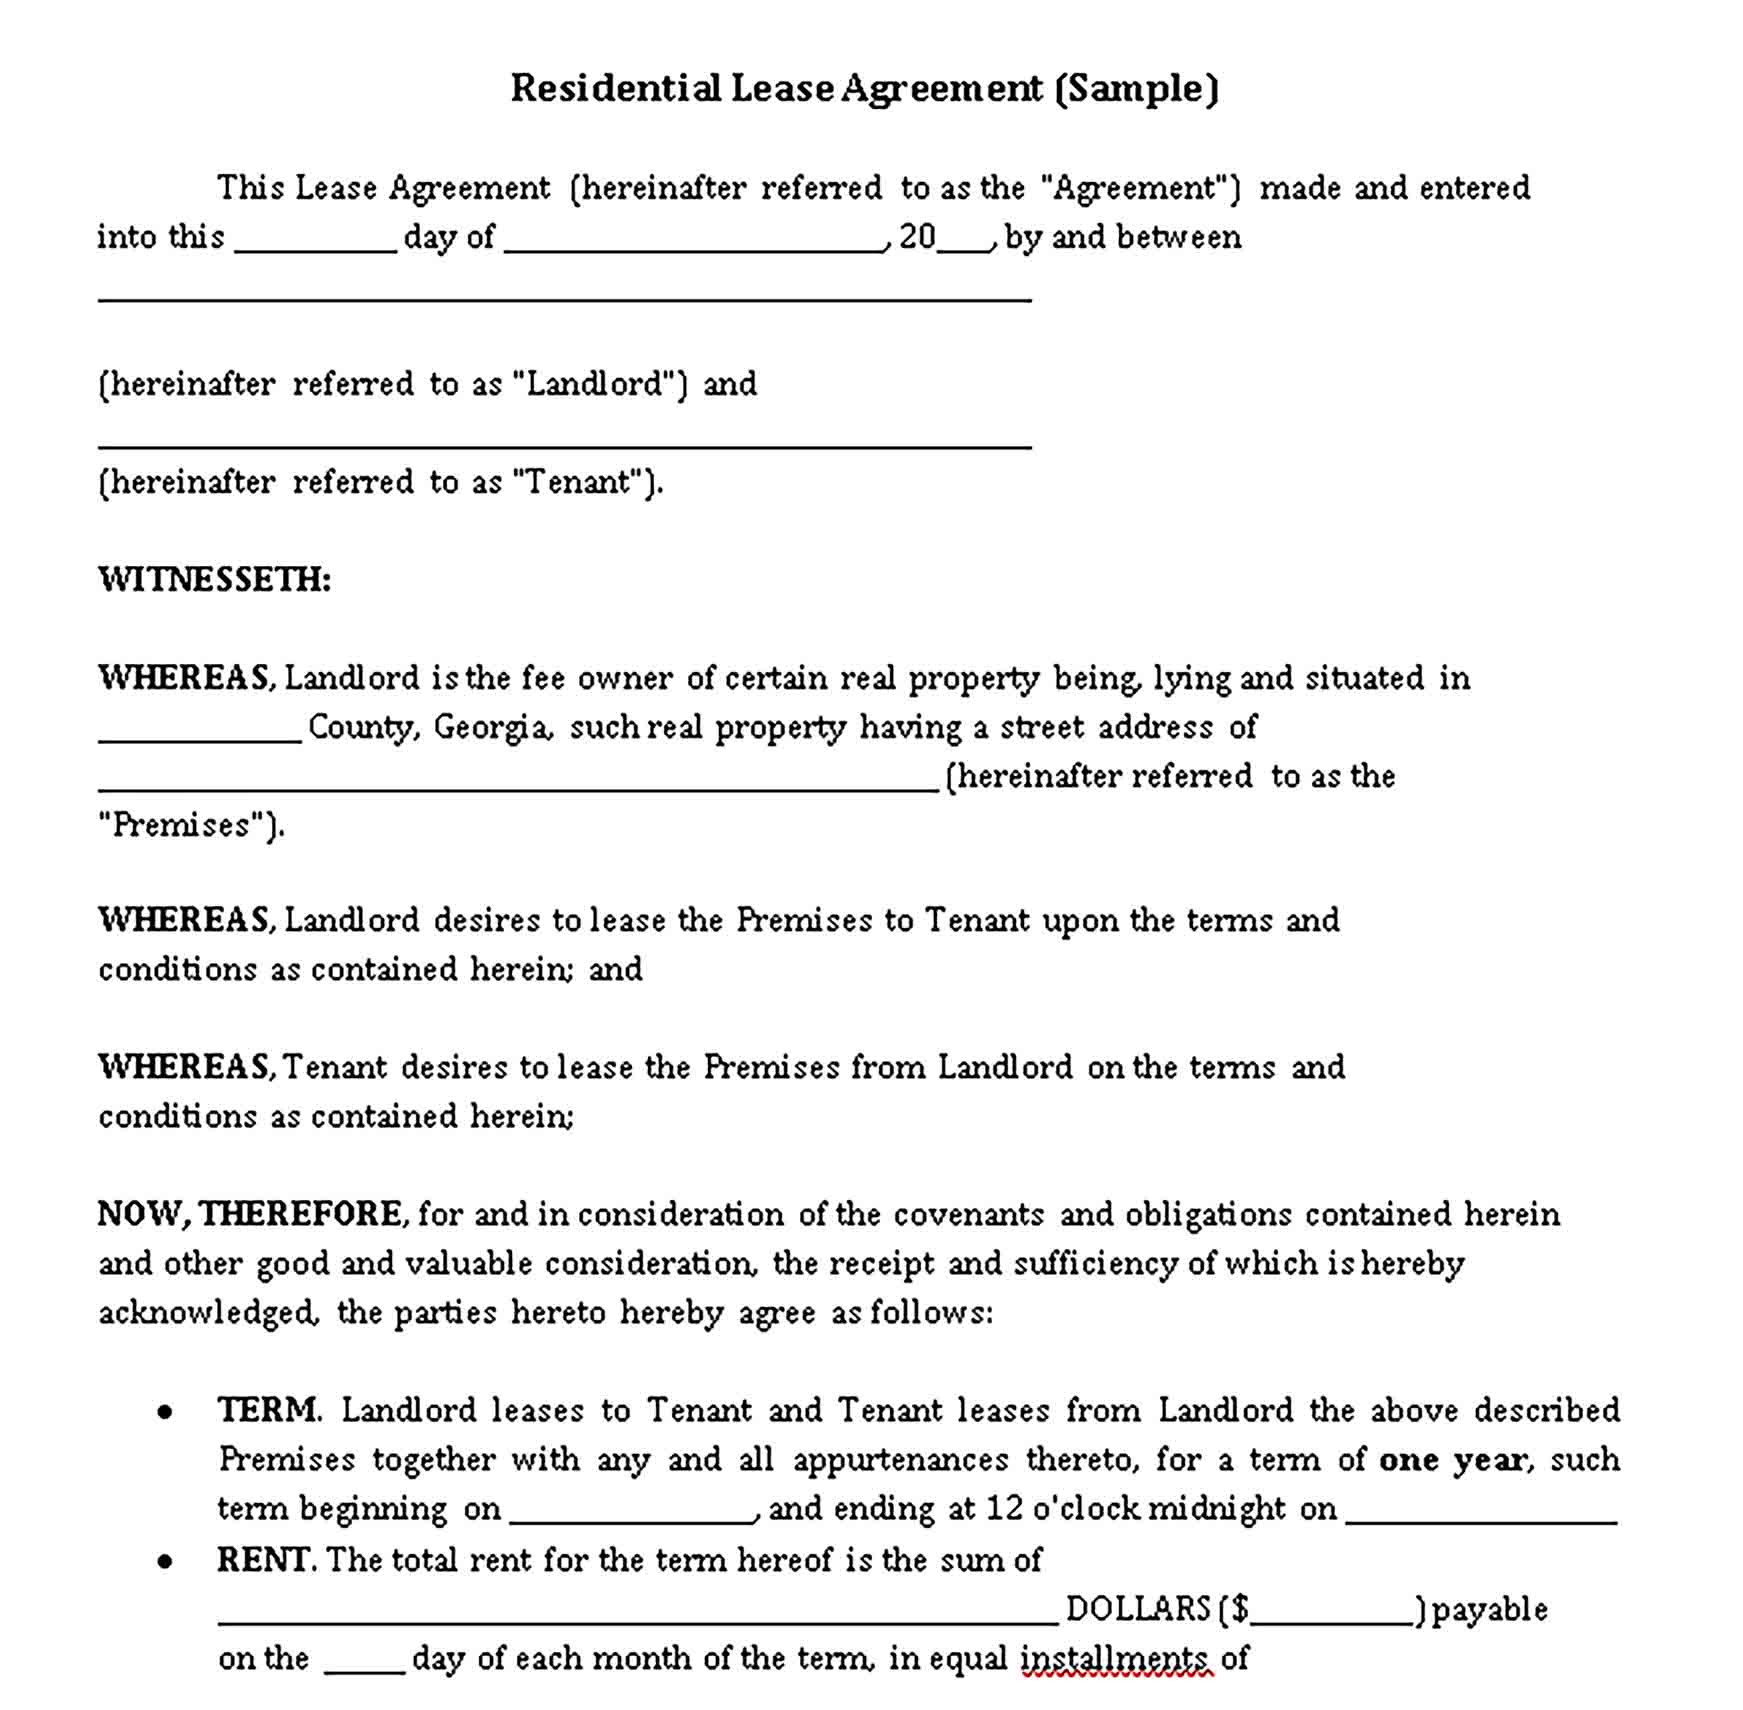 Templates Private Residential Lease Agreement Sample 1